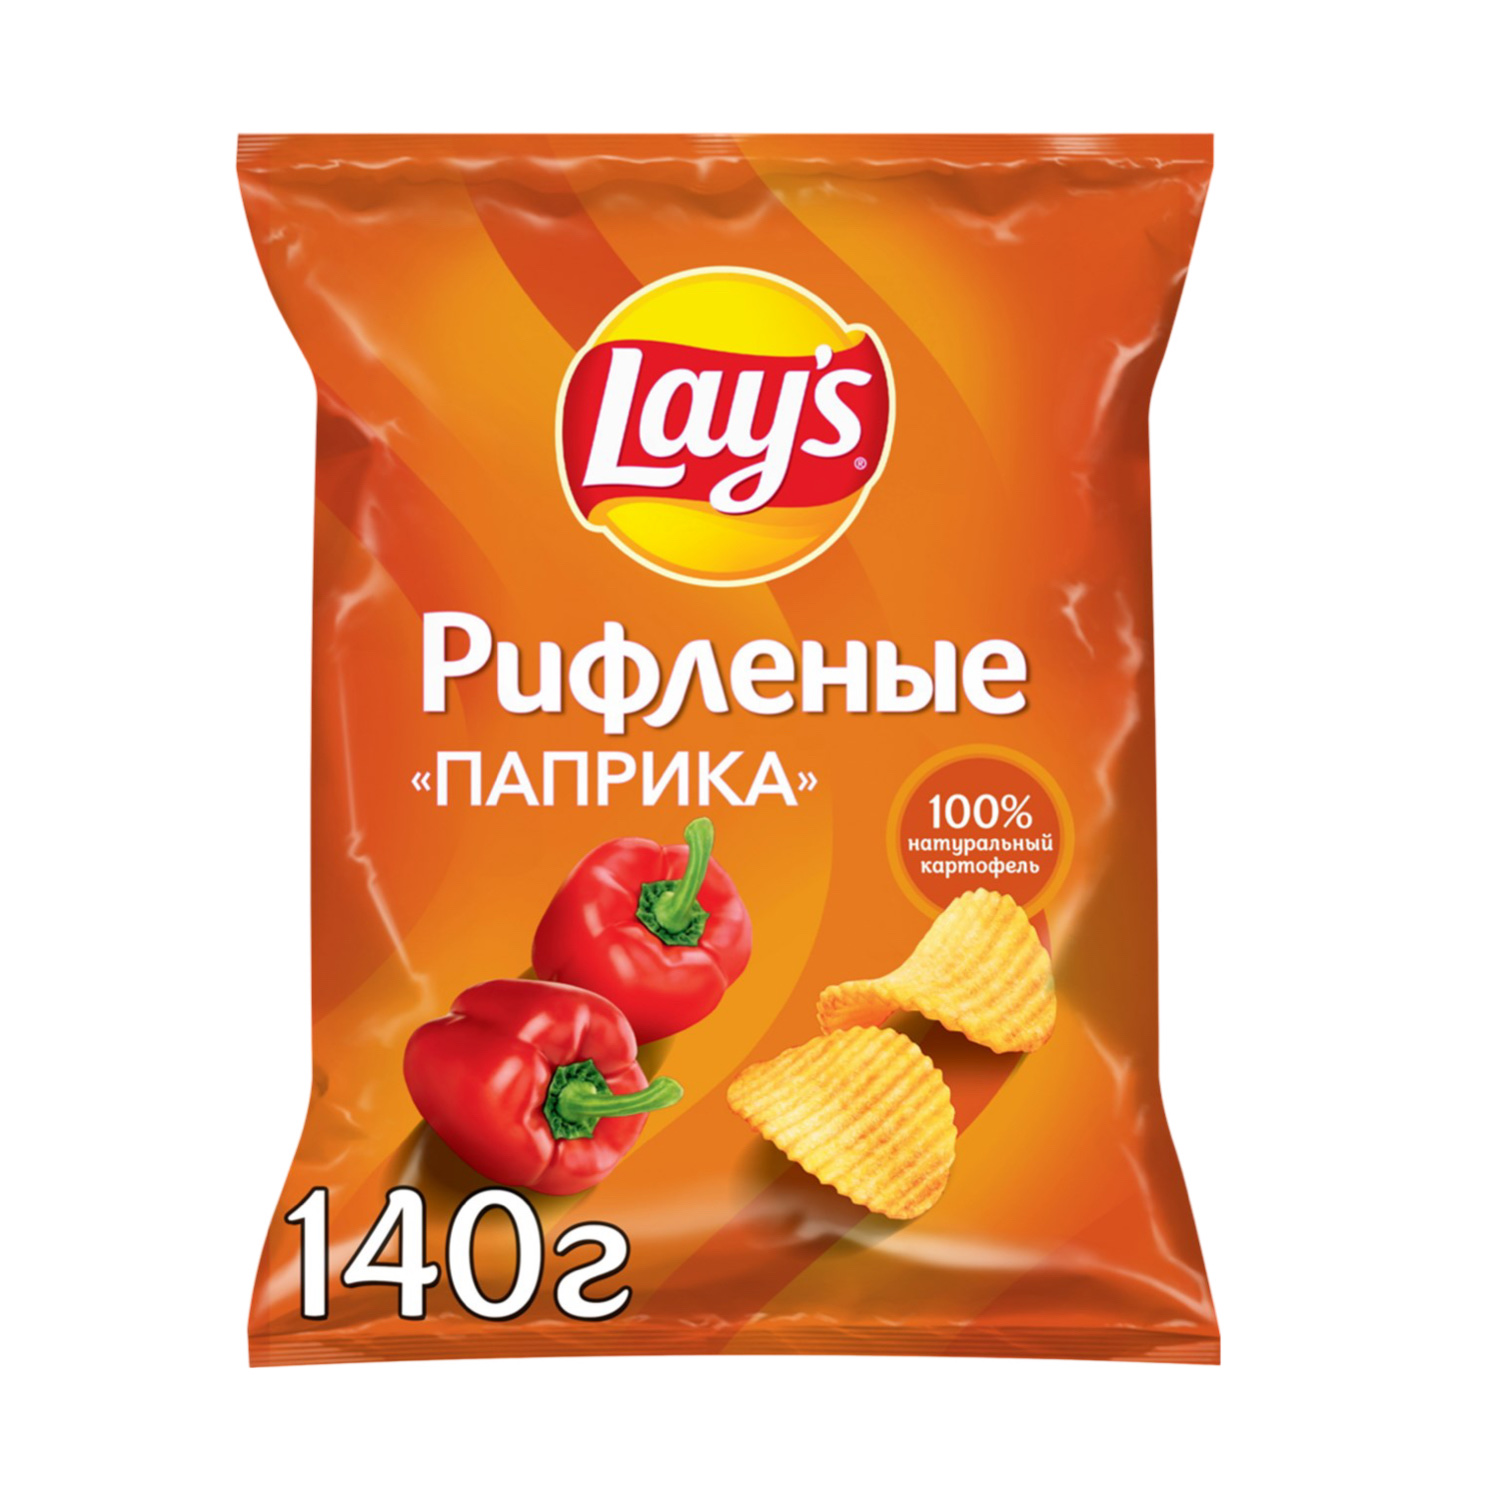 LAY's Паприка Рифленые 140гр